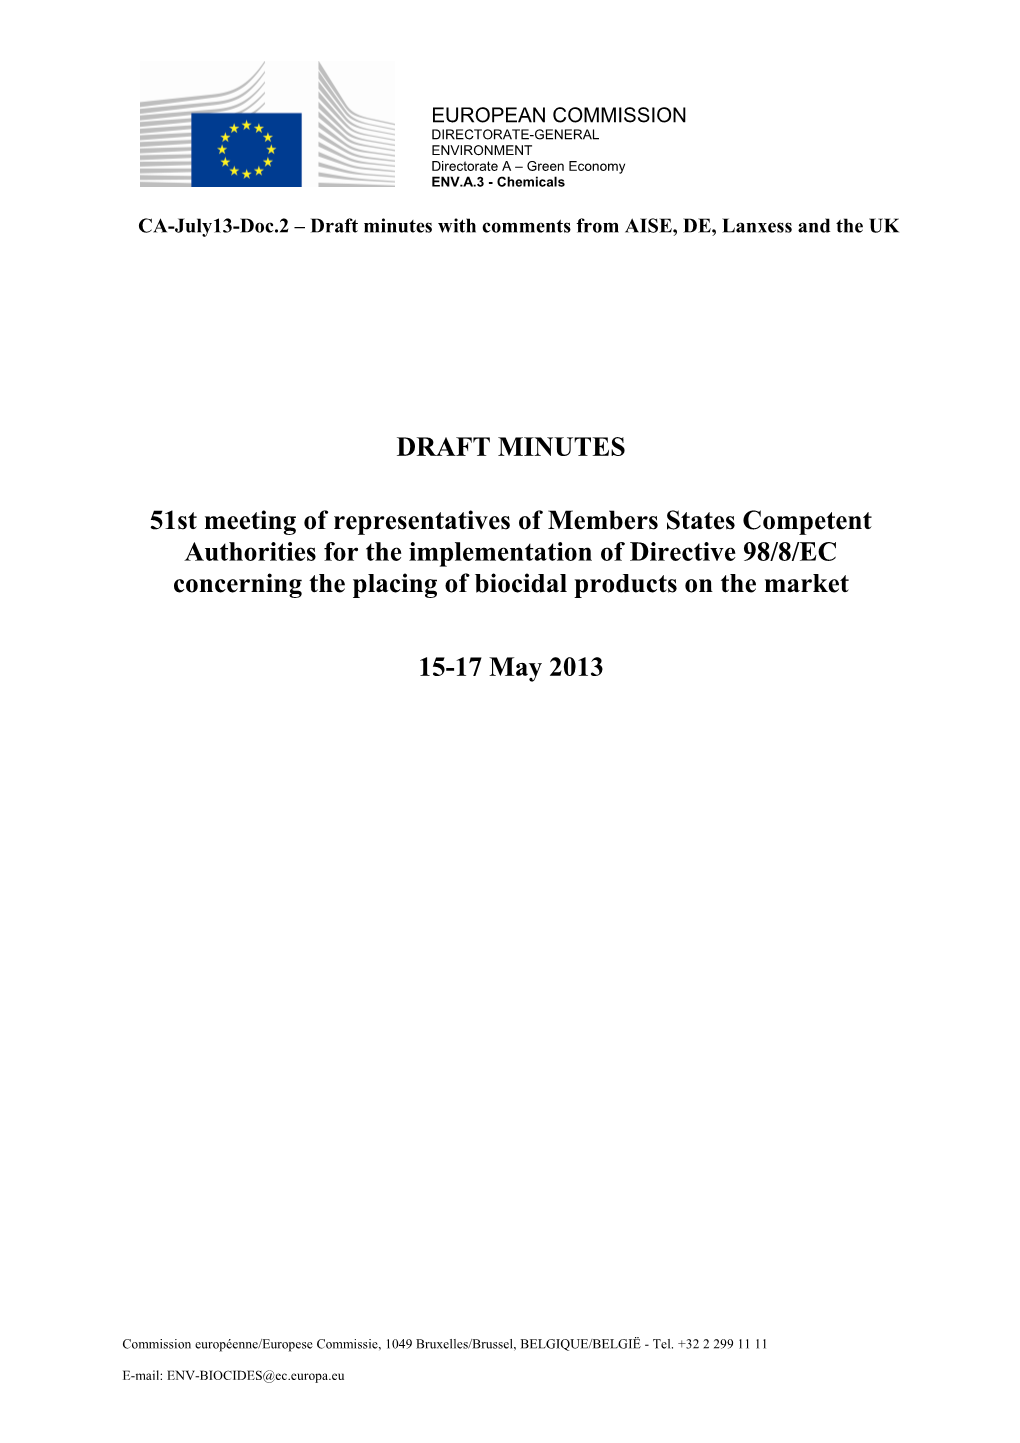 CA-July13-Doc.2 Draft Minutes with Comments from AISE, DE,Lanxess and the UK